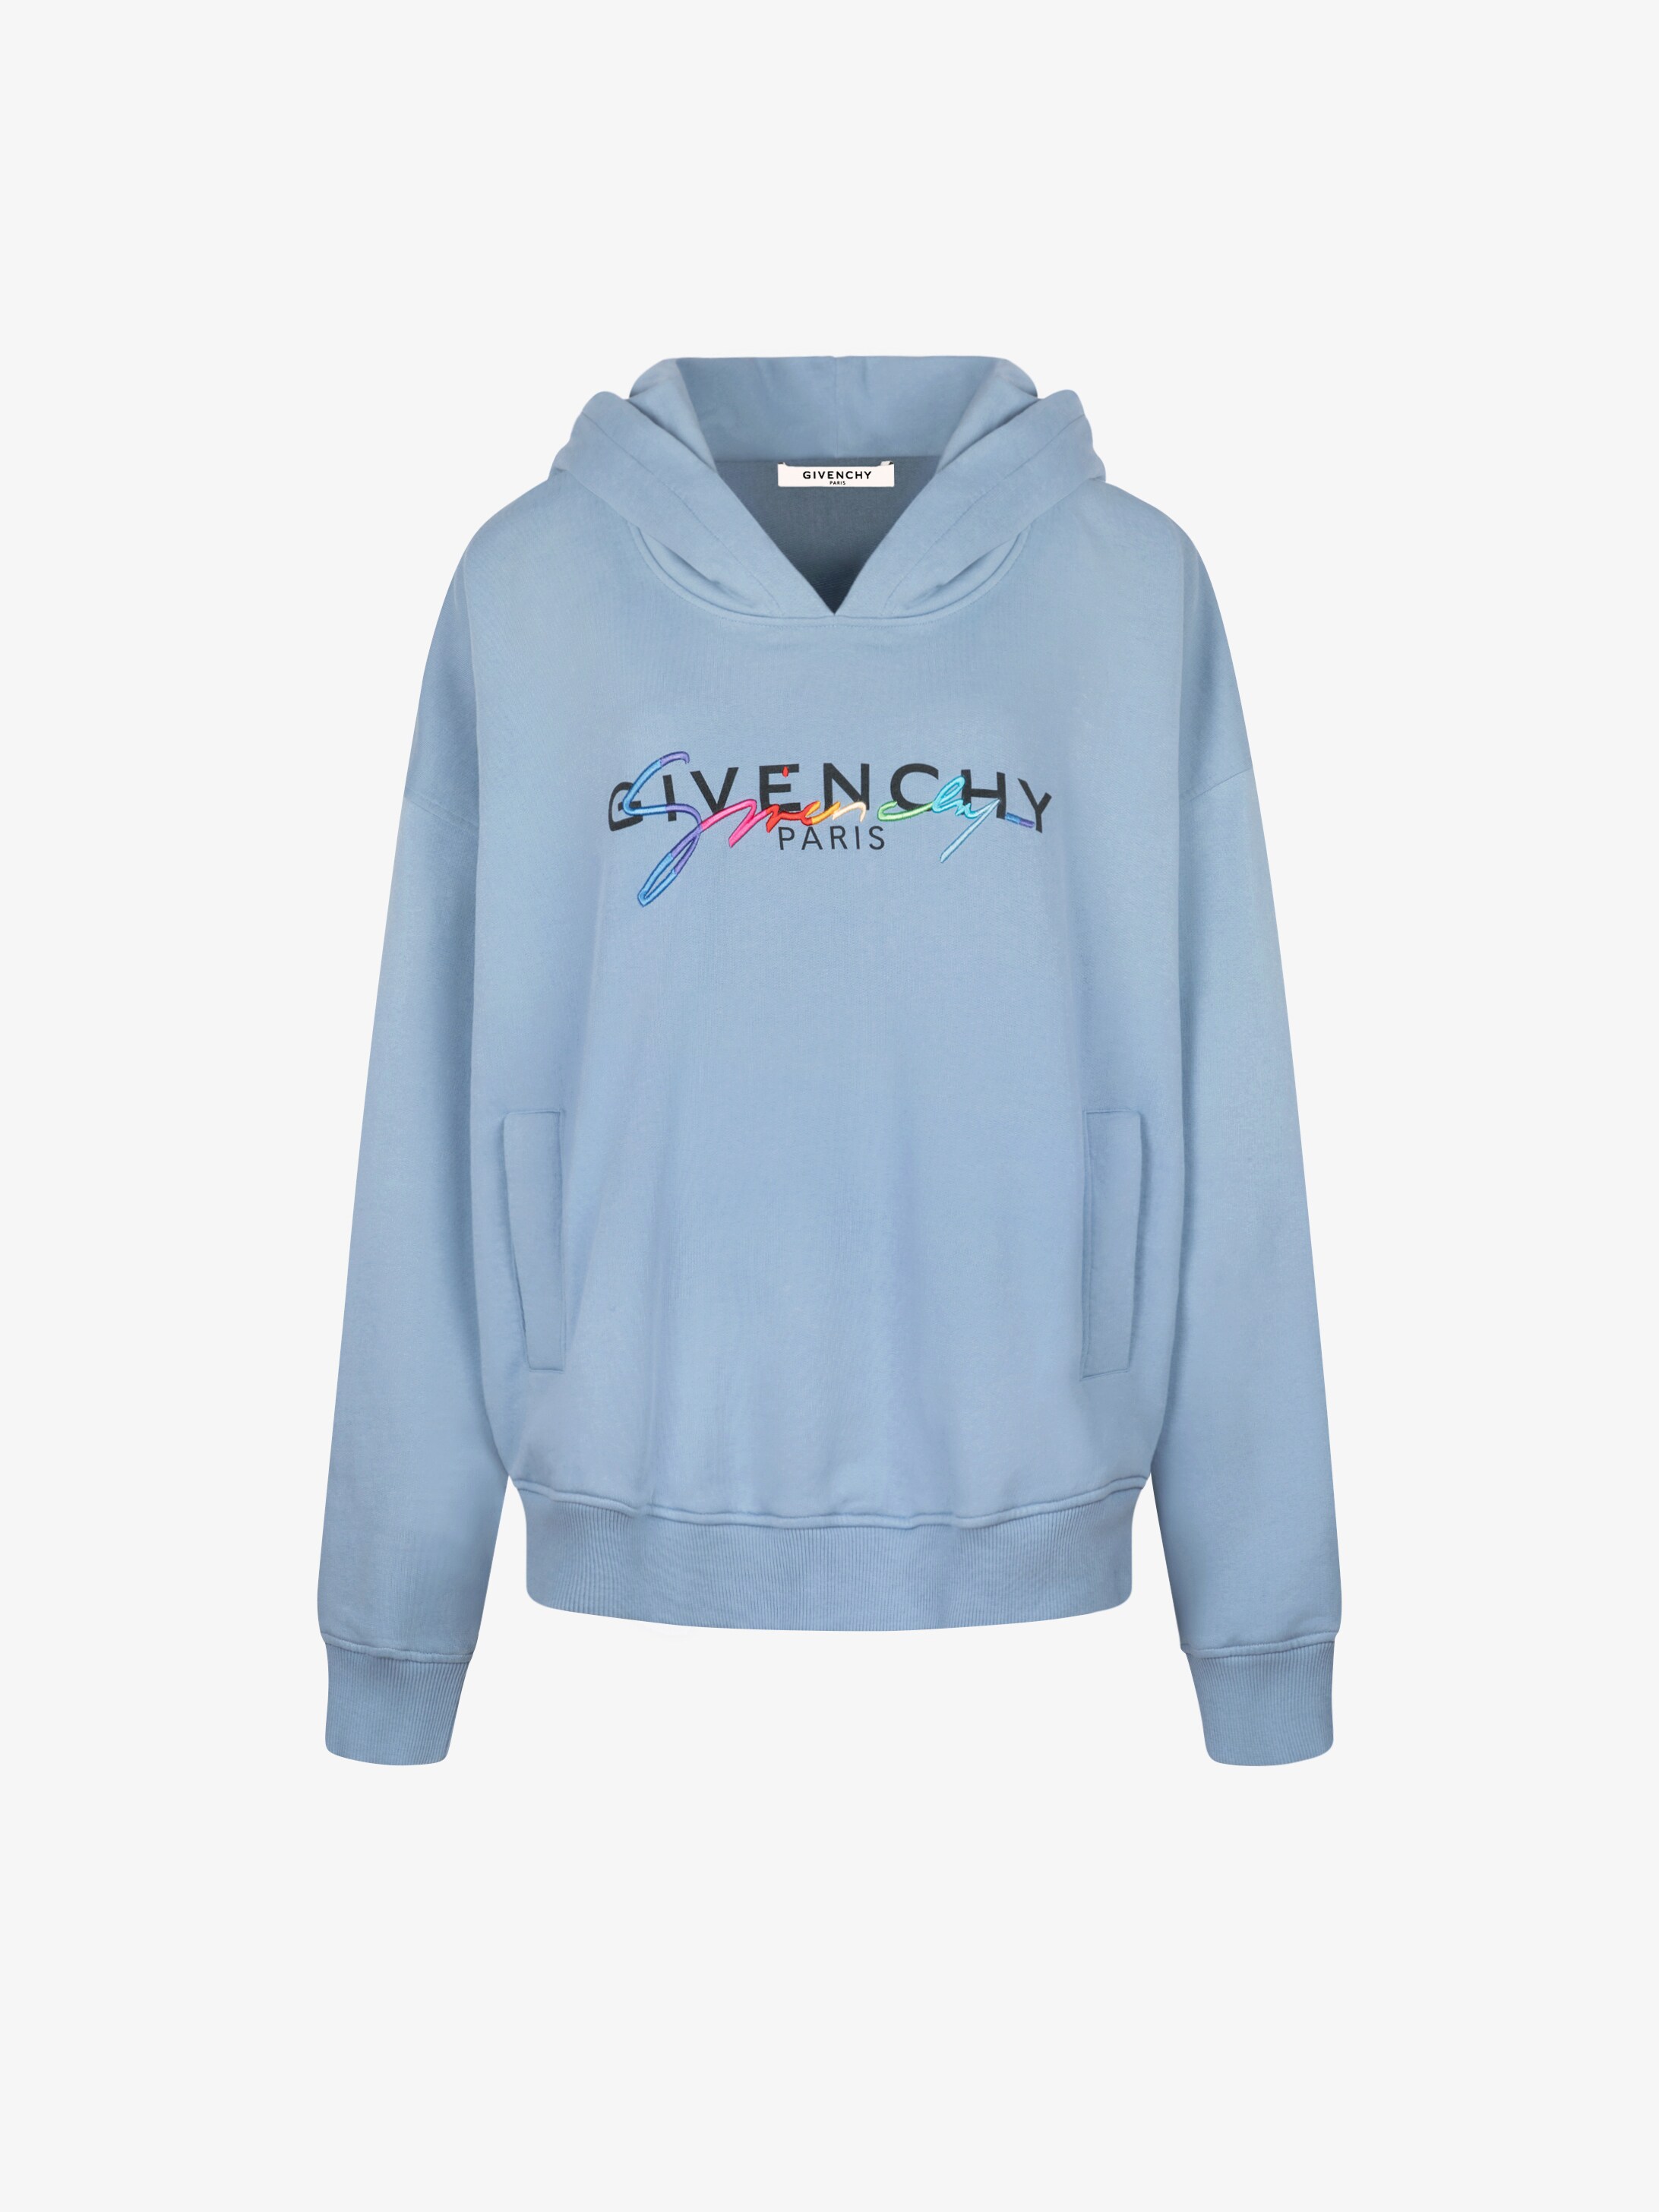 givenchy hoodie price